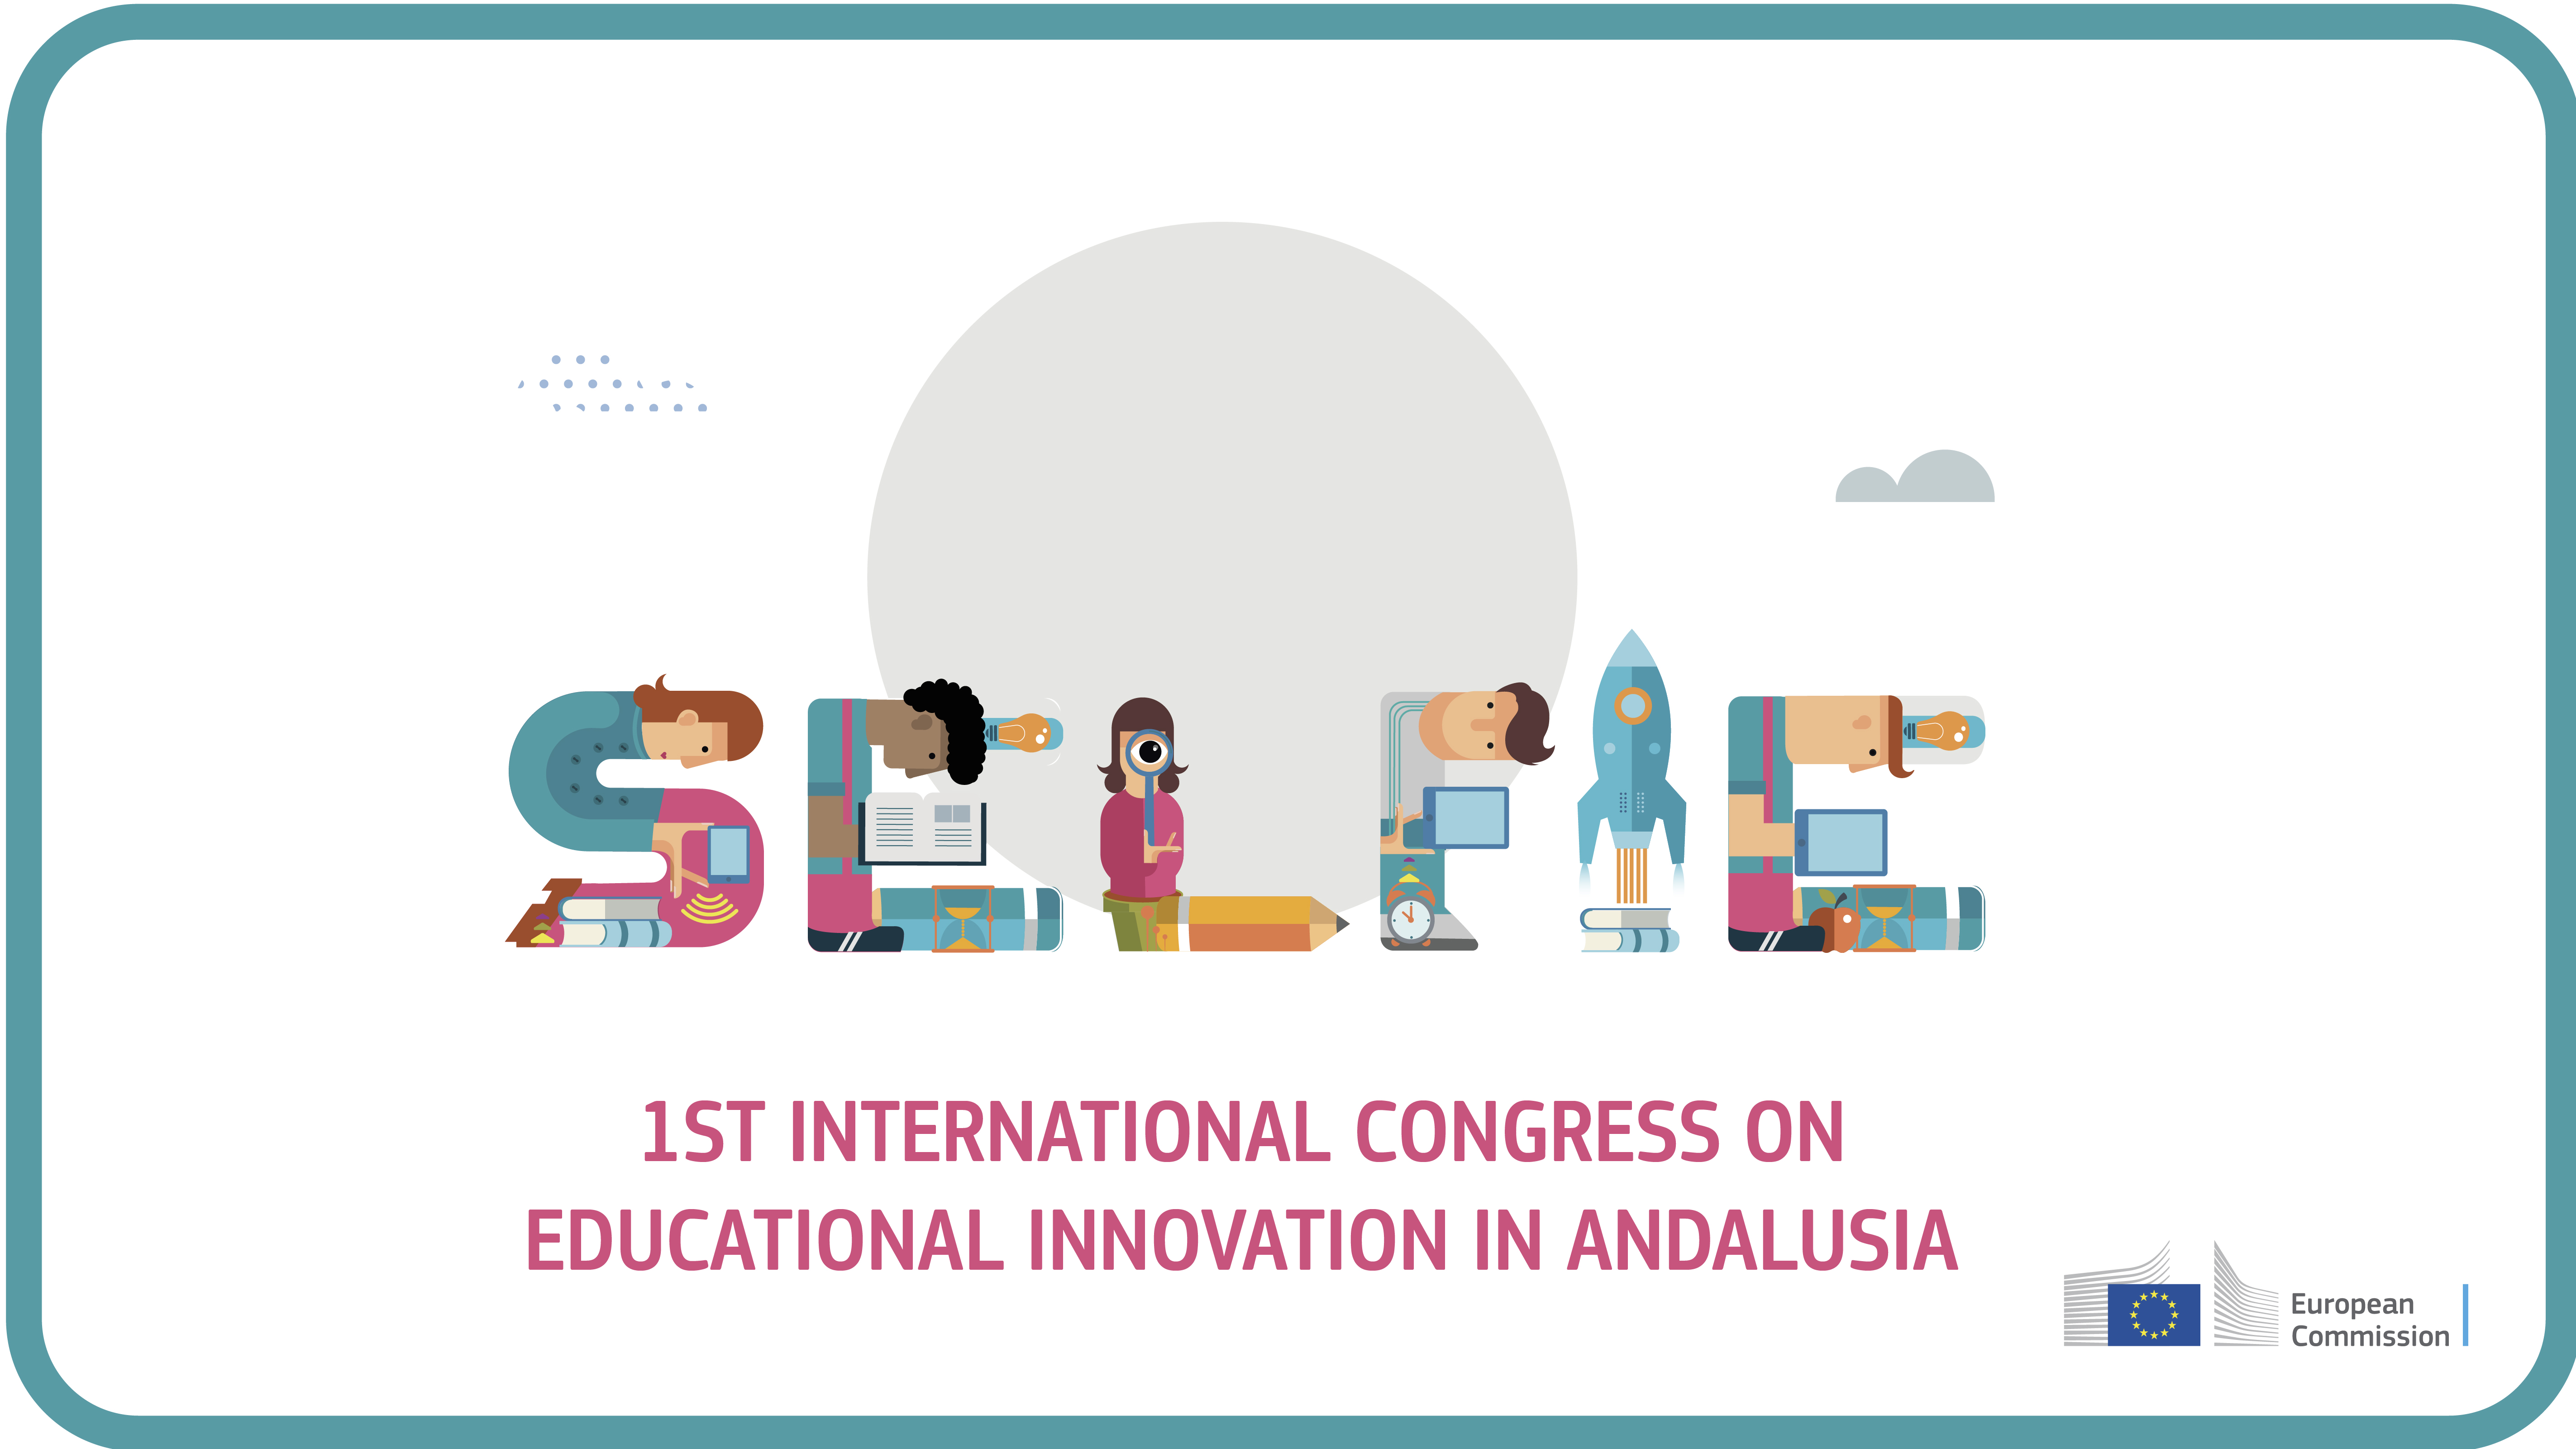 1st International Congress on Educational Innovation in Andalusia